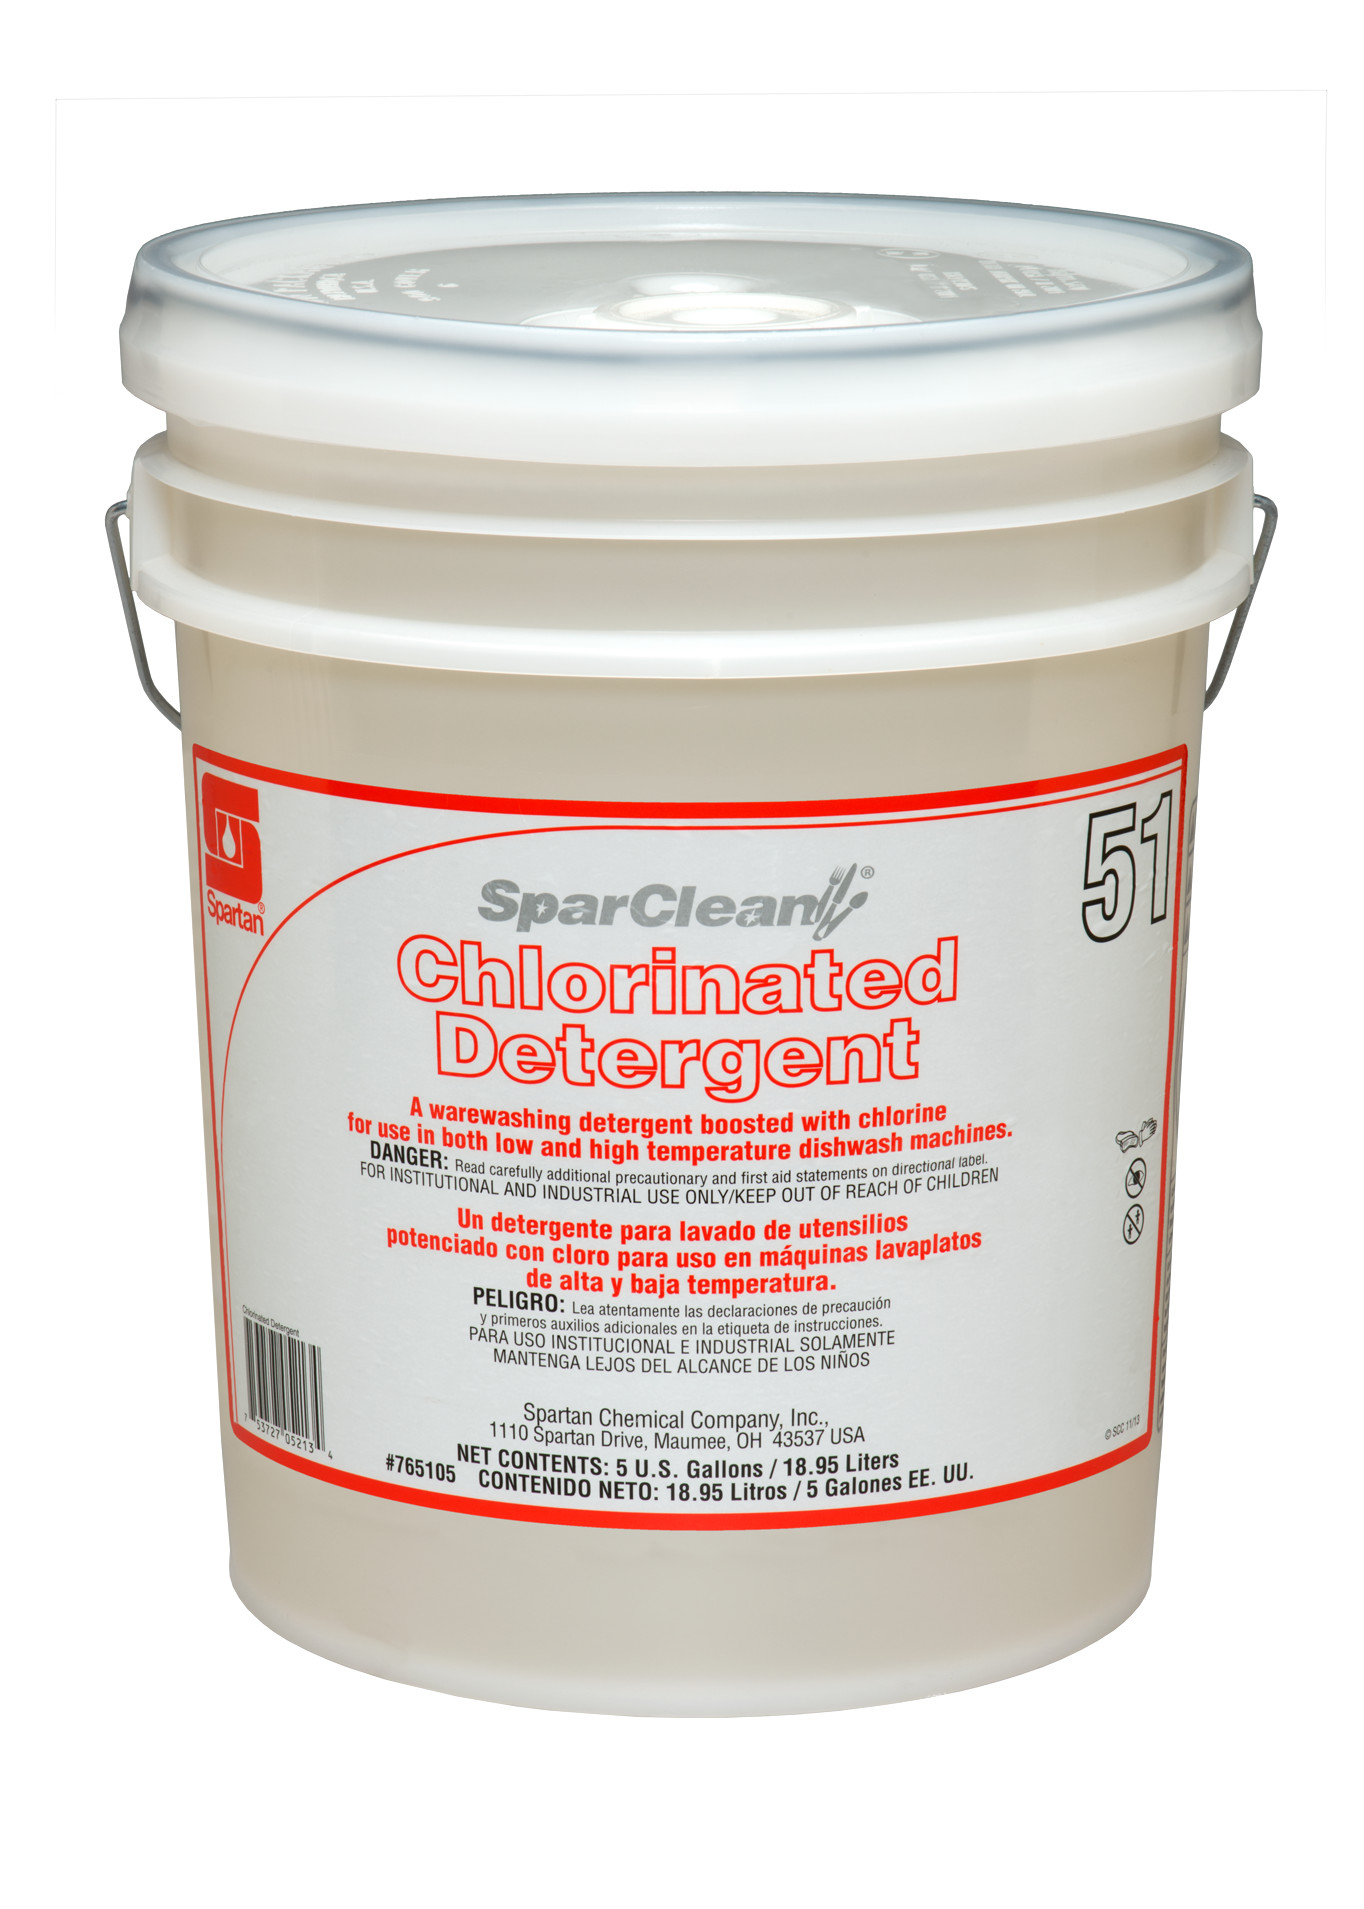 Spartan Chemical Company SparClean Chlorinated Detergent 51, 5 GAL PAIL